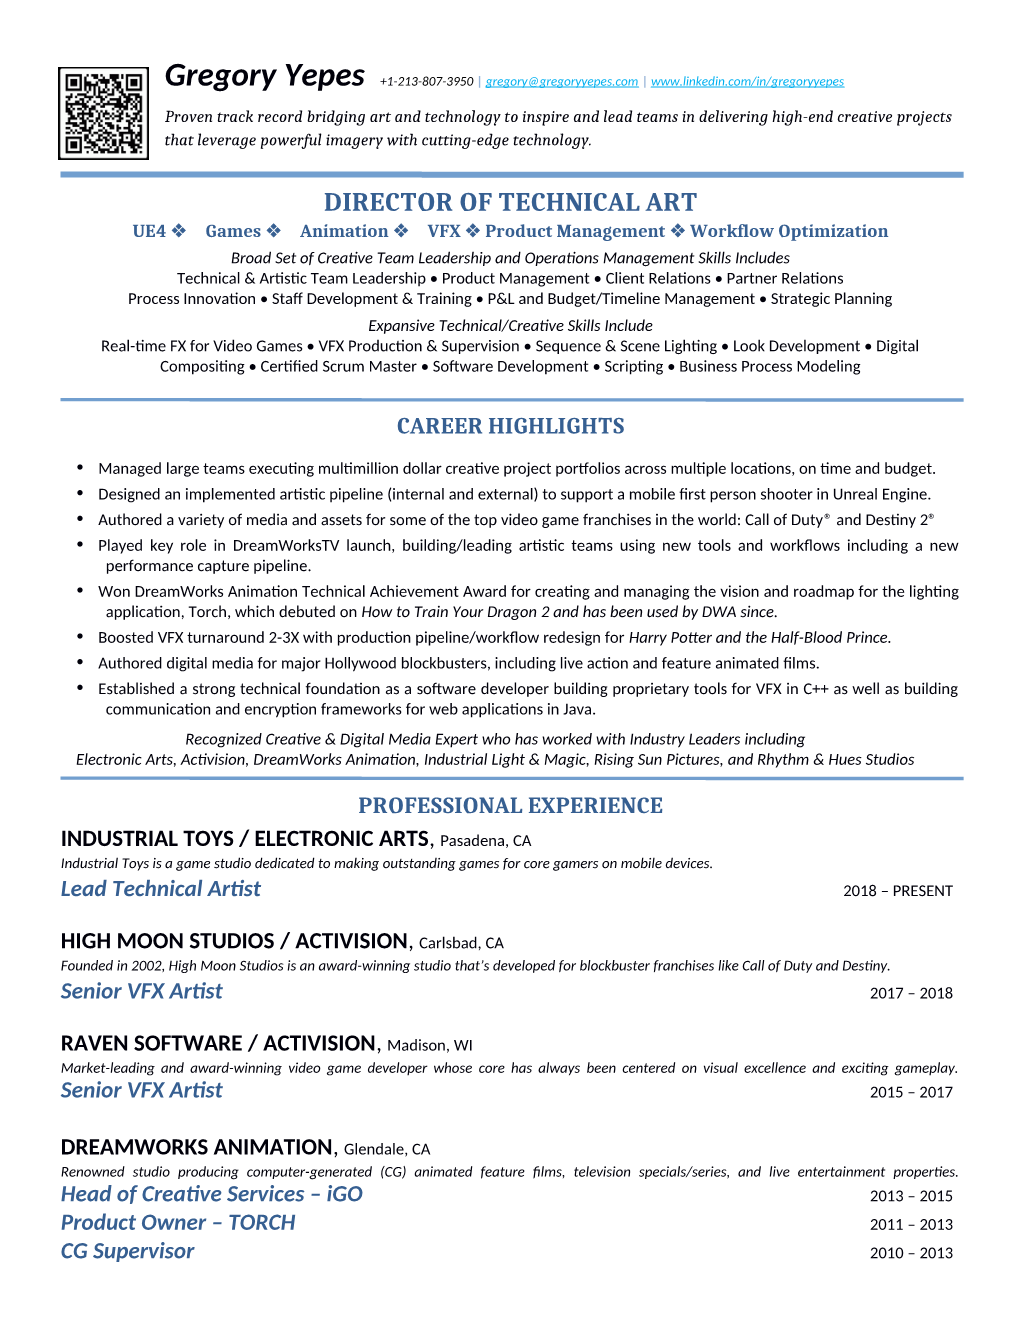 Director of Technical